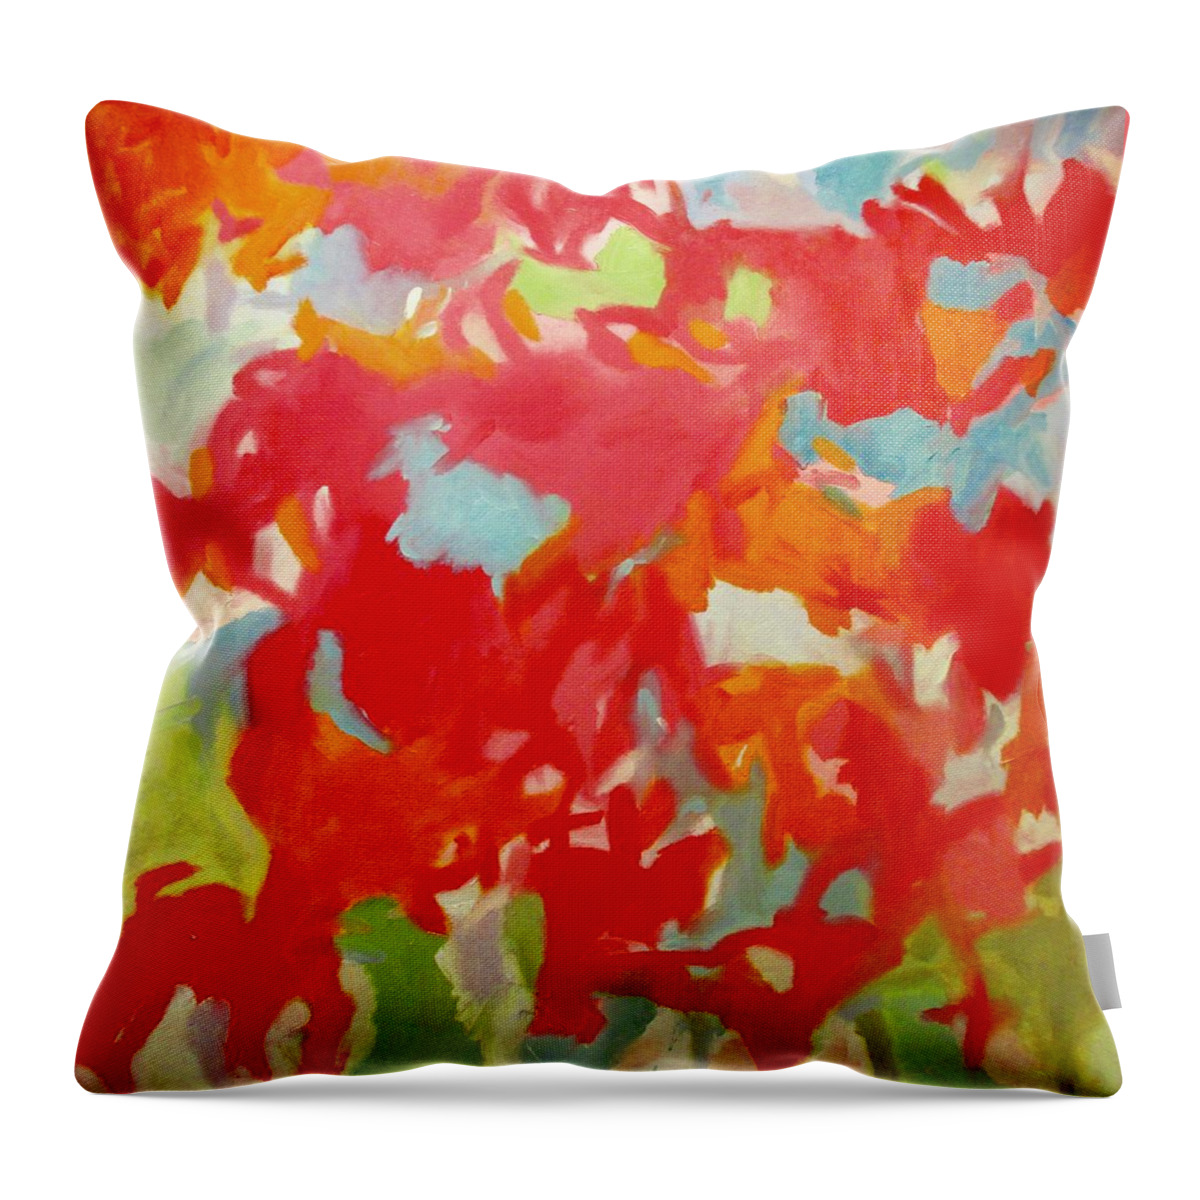 Abstract Throw Pillow featuring the painting The Good Earth by Steven Miller